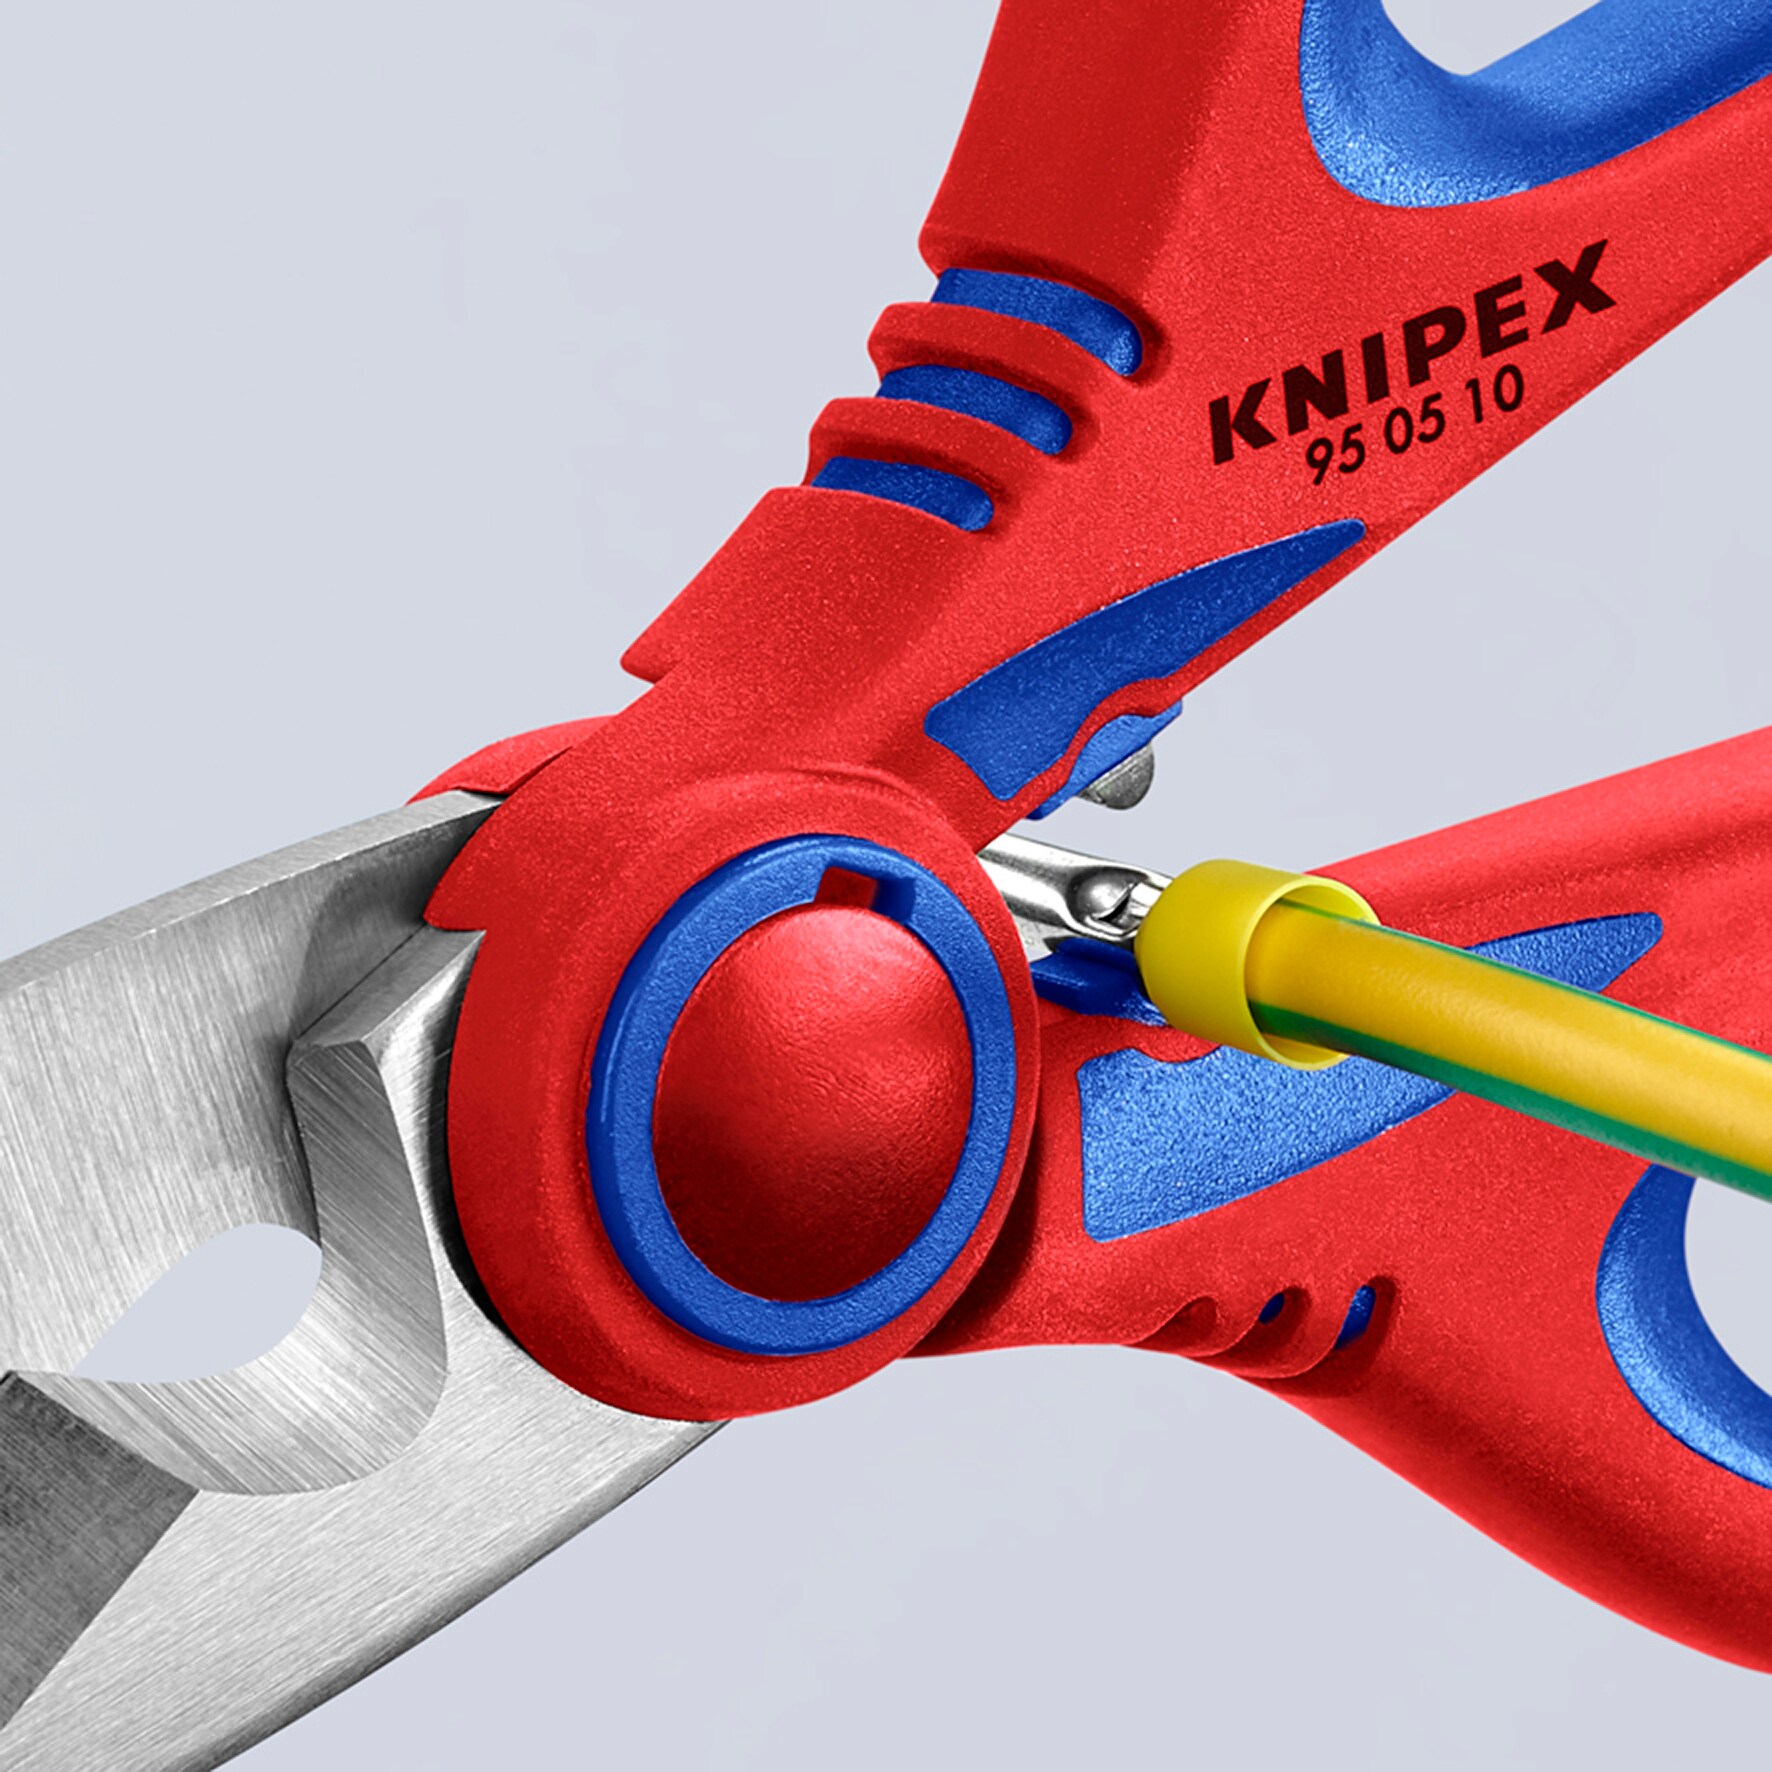 Knipex Scissors (59 products) compare prices today »